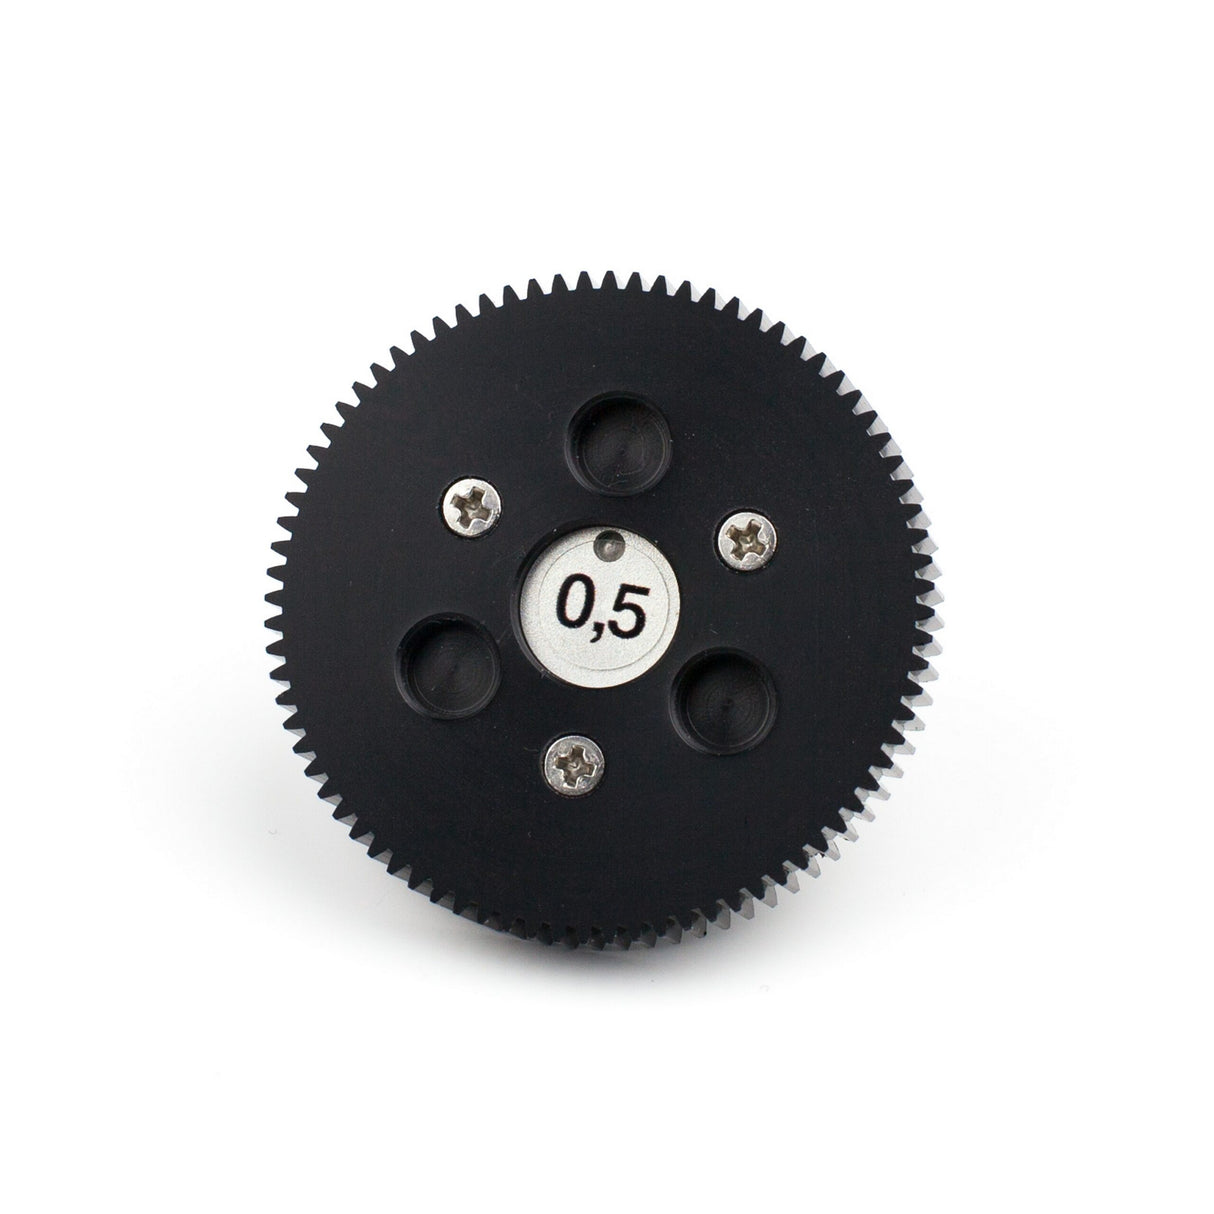 Heden M26 0.5 Dual Pin Snap-On Gear